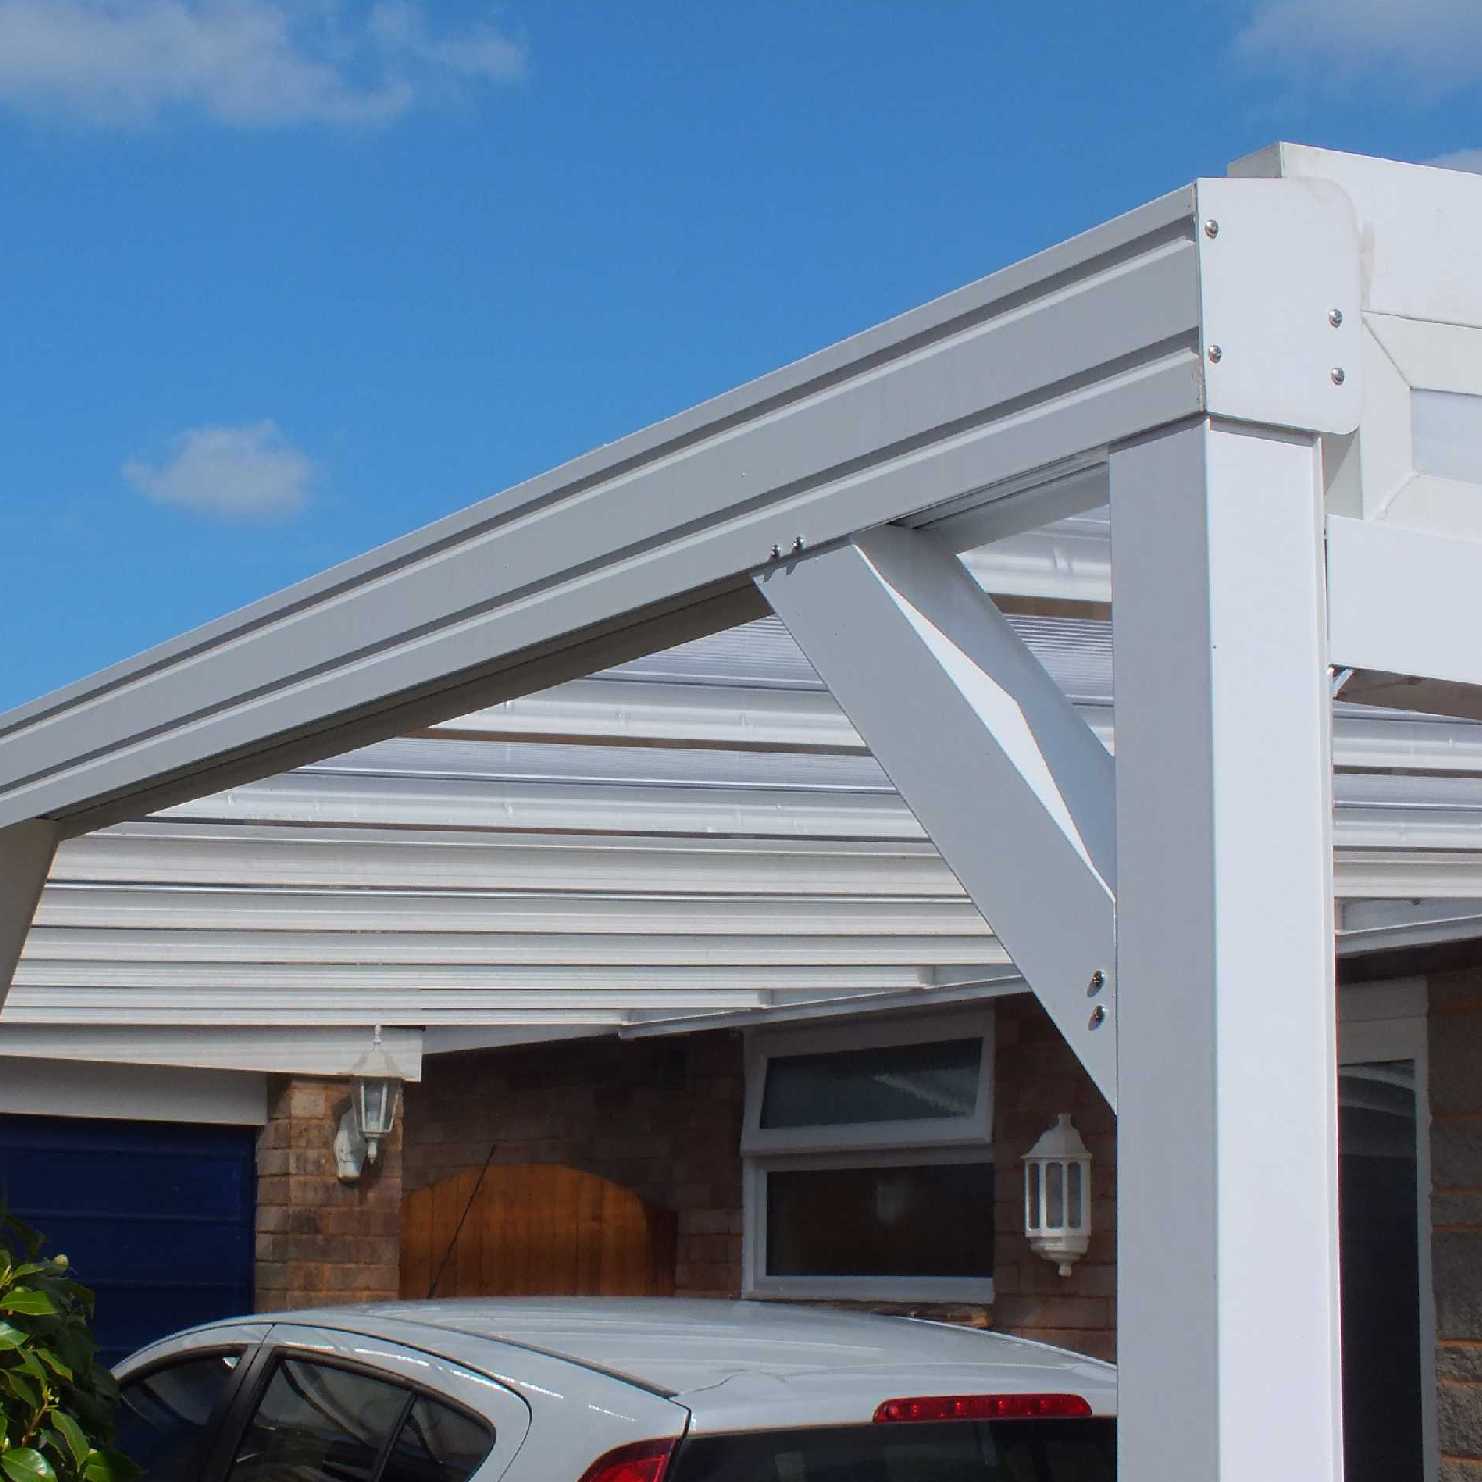 Great deals on Omega Smart Lean-To Canopy, White with 16mm Polycarbonate Glazing - 7.0m (W) x 4.0m (P), (4) Supporting Posts